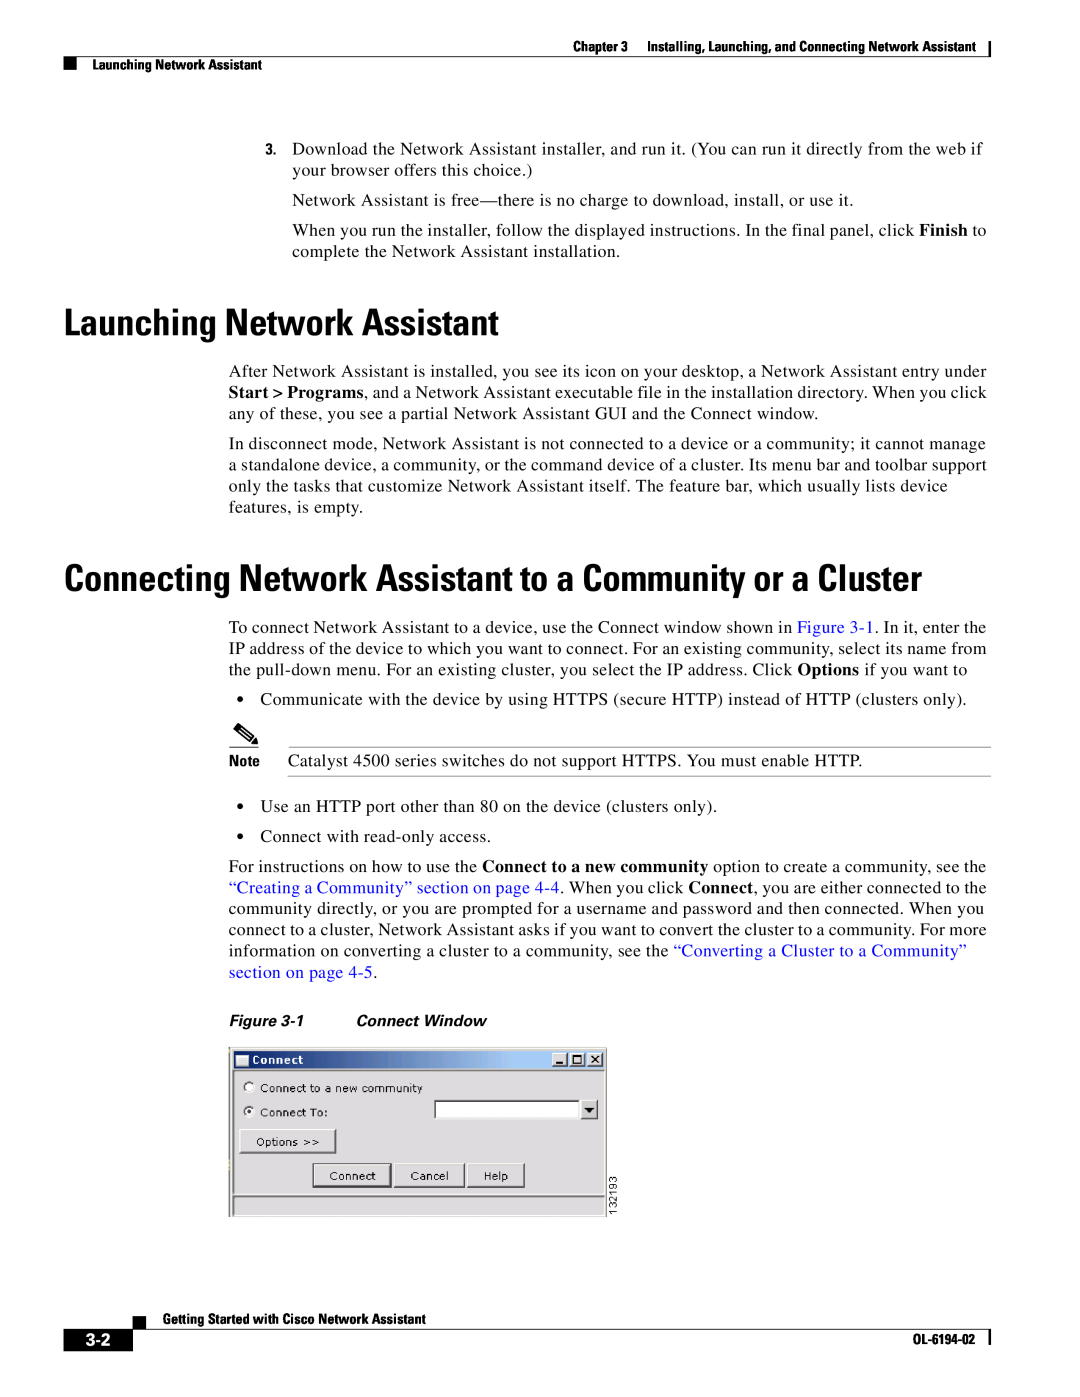 Cisco Systems manual Launching Network Assistant, Connecting Network Assistant to a Community or a Cluster 